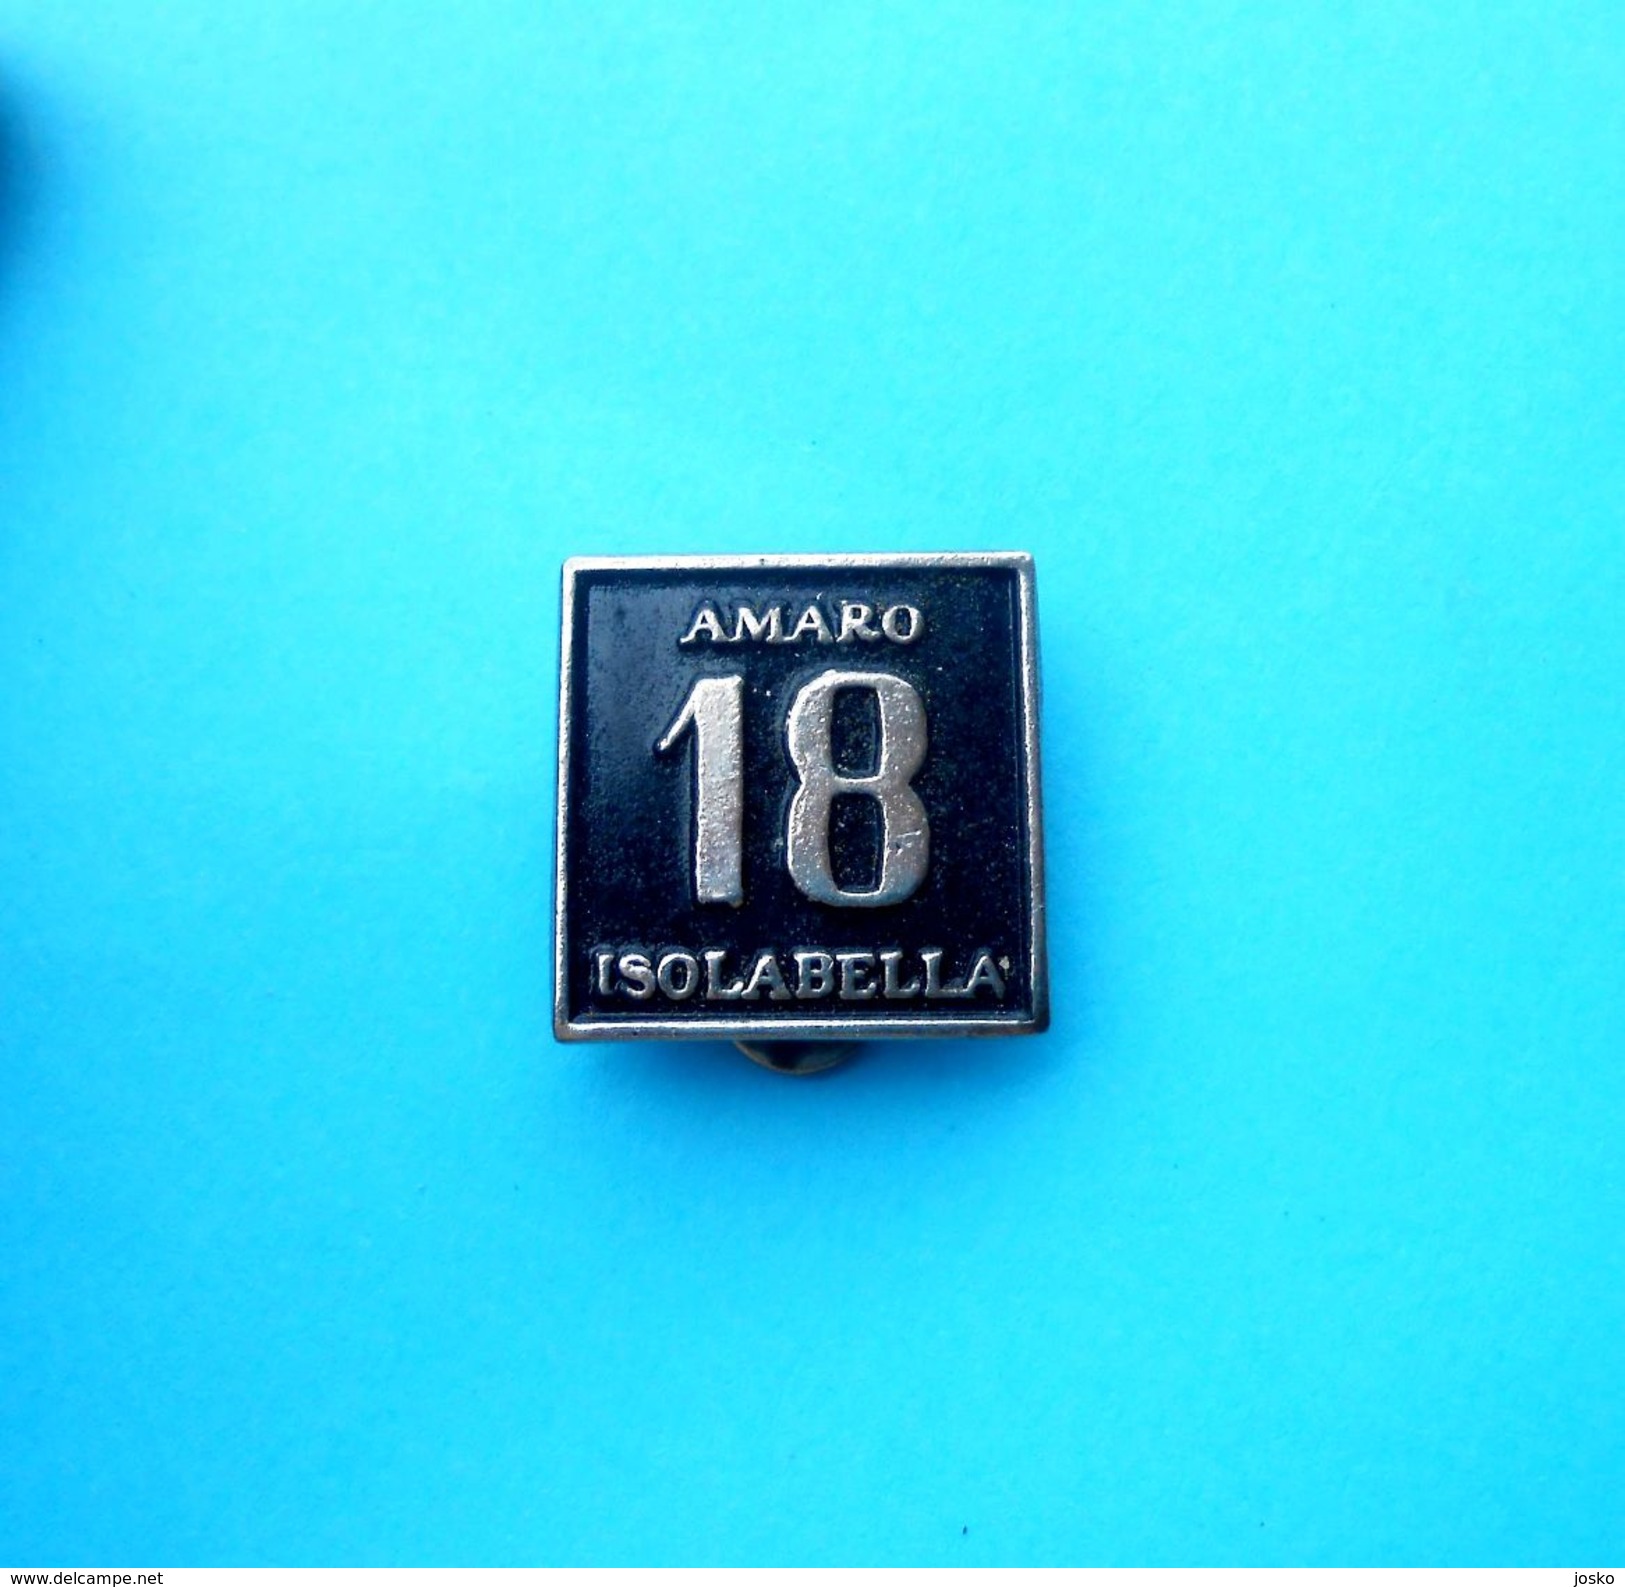 AMARO 18 ISOLABELLA ... Italy Tonic Drink - Herbal Liqueur * Old Buttonhole Pin Badge Alcoholic Beverage Italia - Beverages